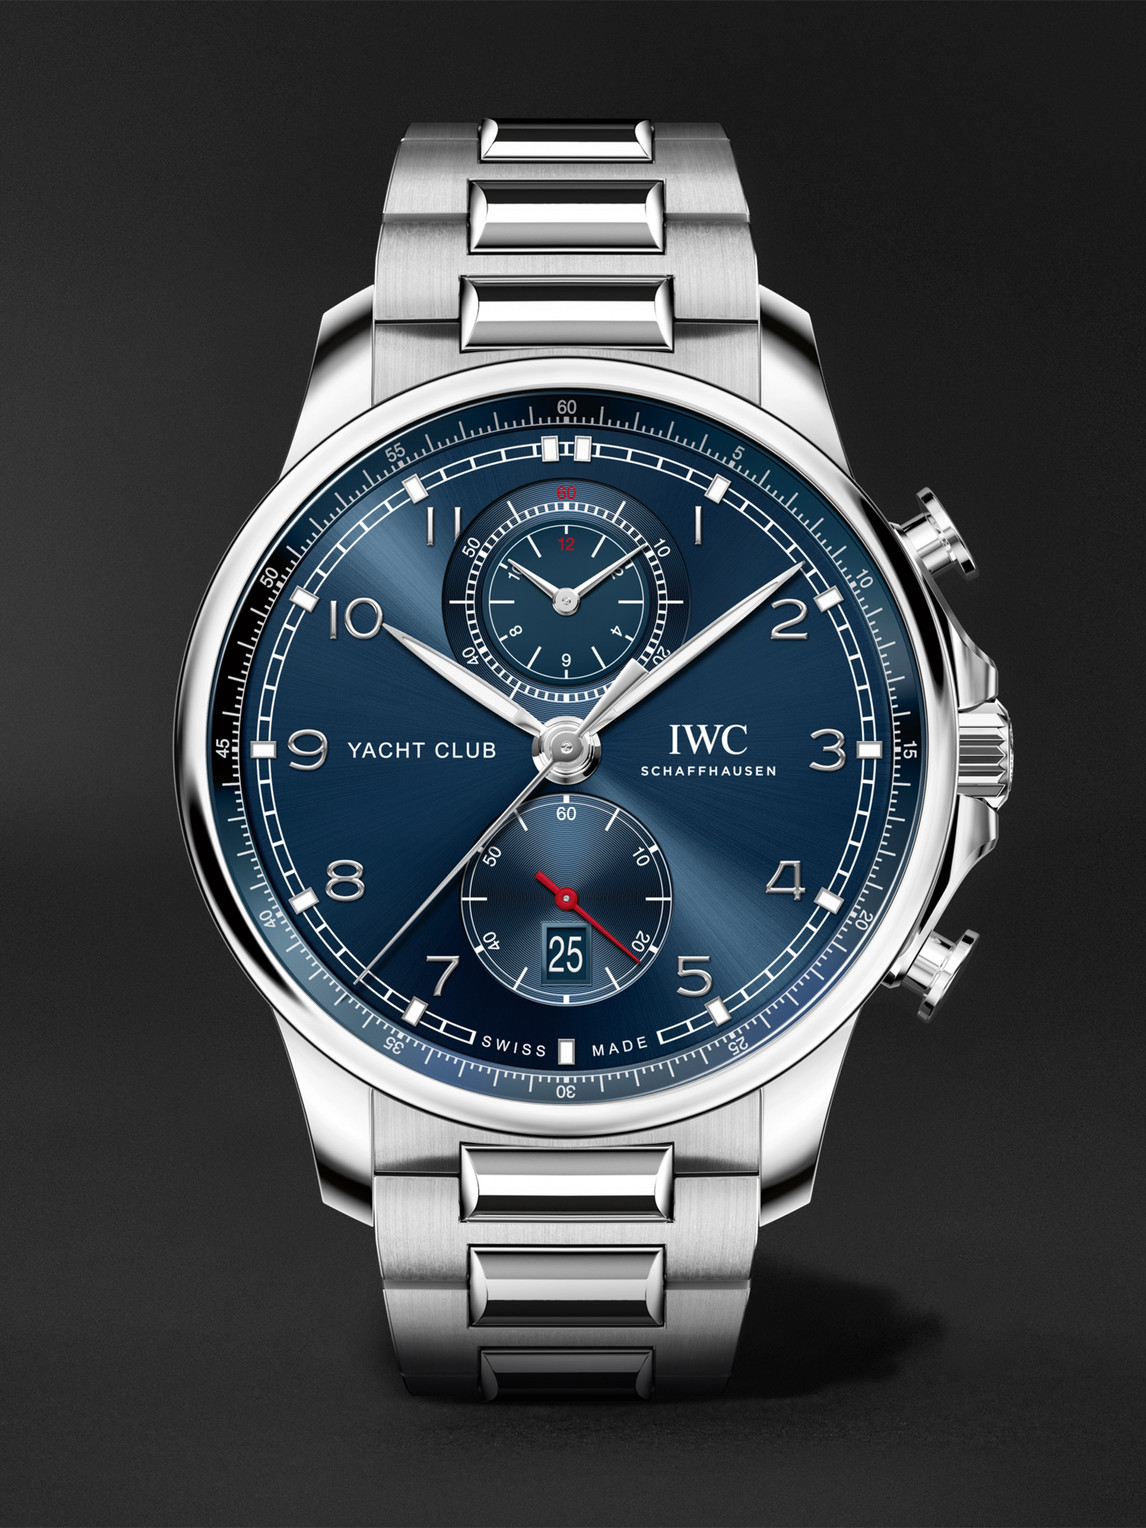 Portugieser Yacht Club Automatic Chronograph 44.6mm Stainless Steel Watch, Ref. No. IW390701